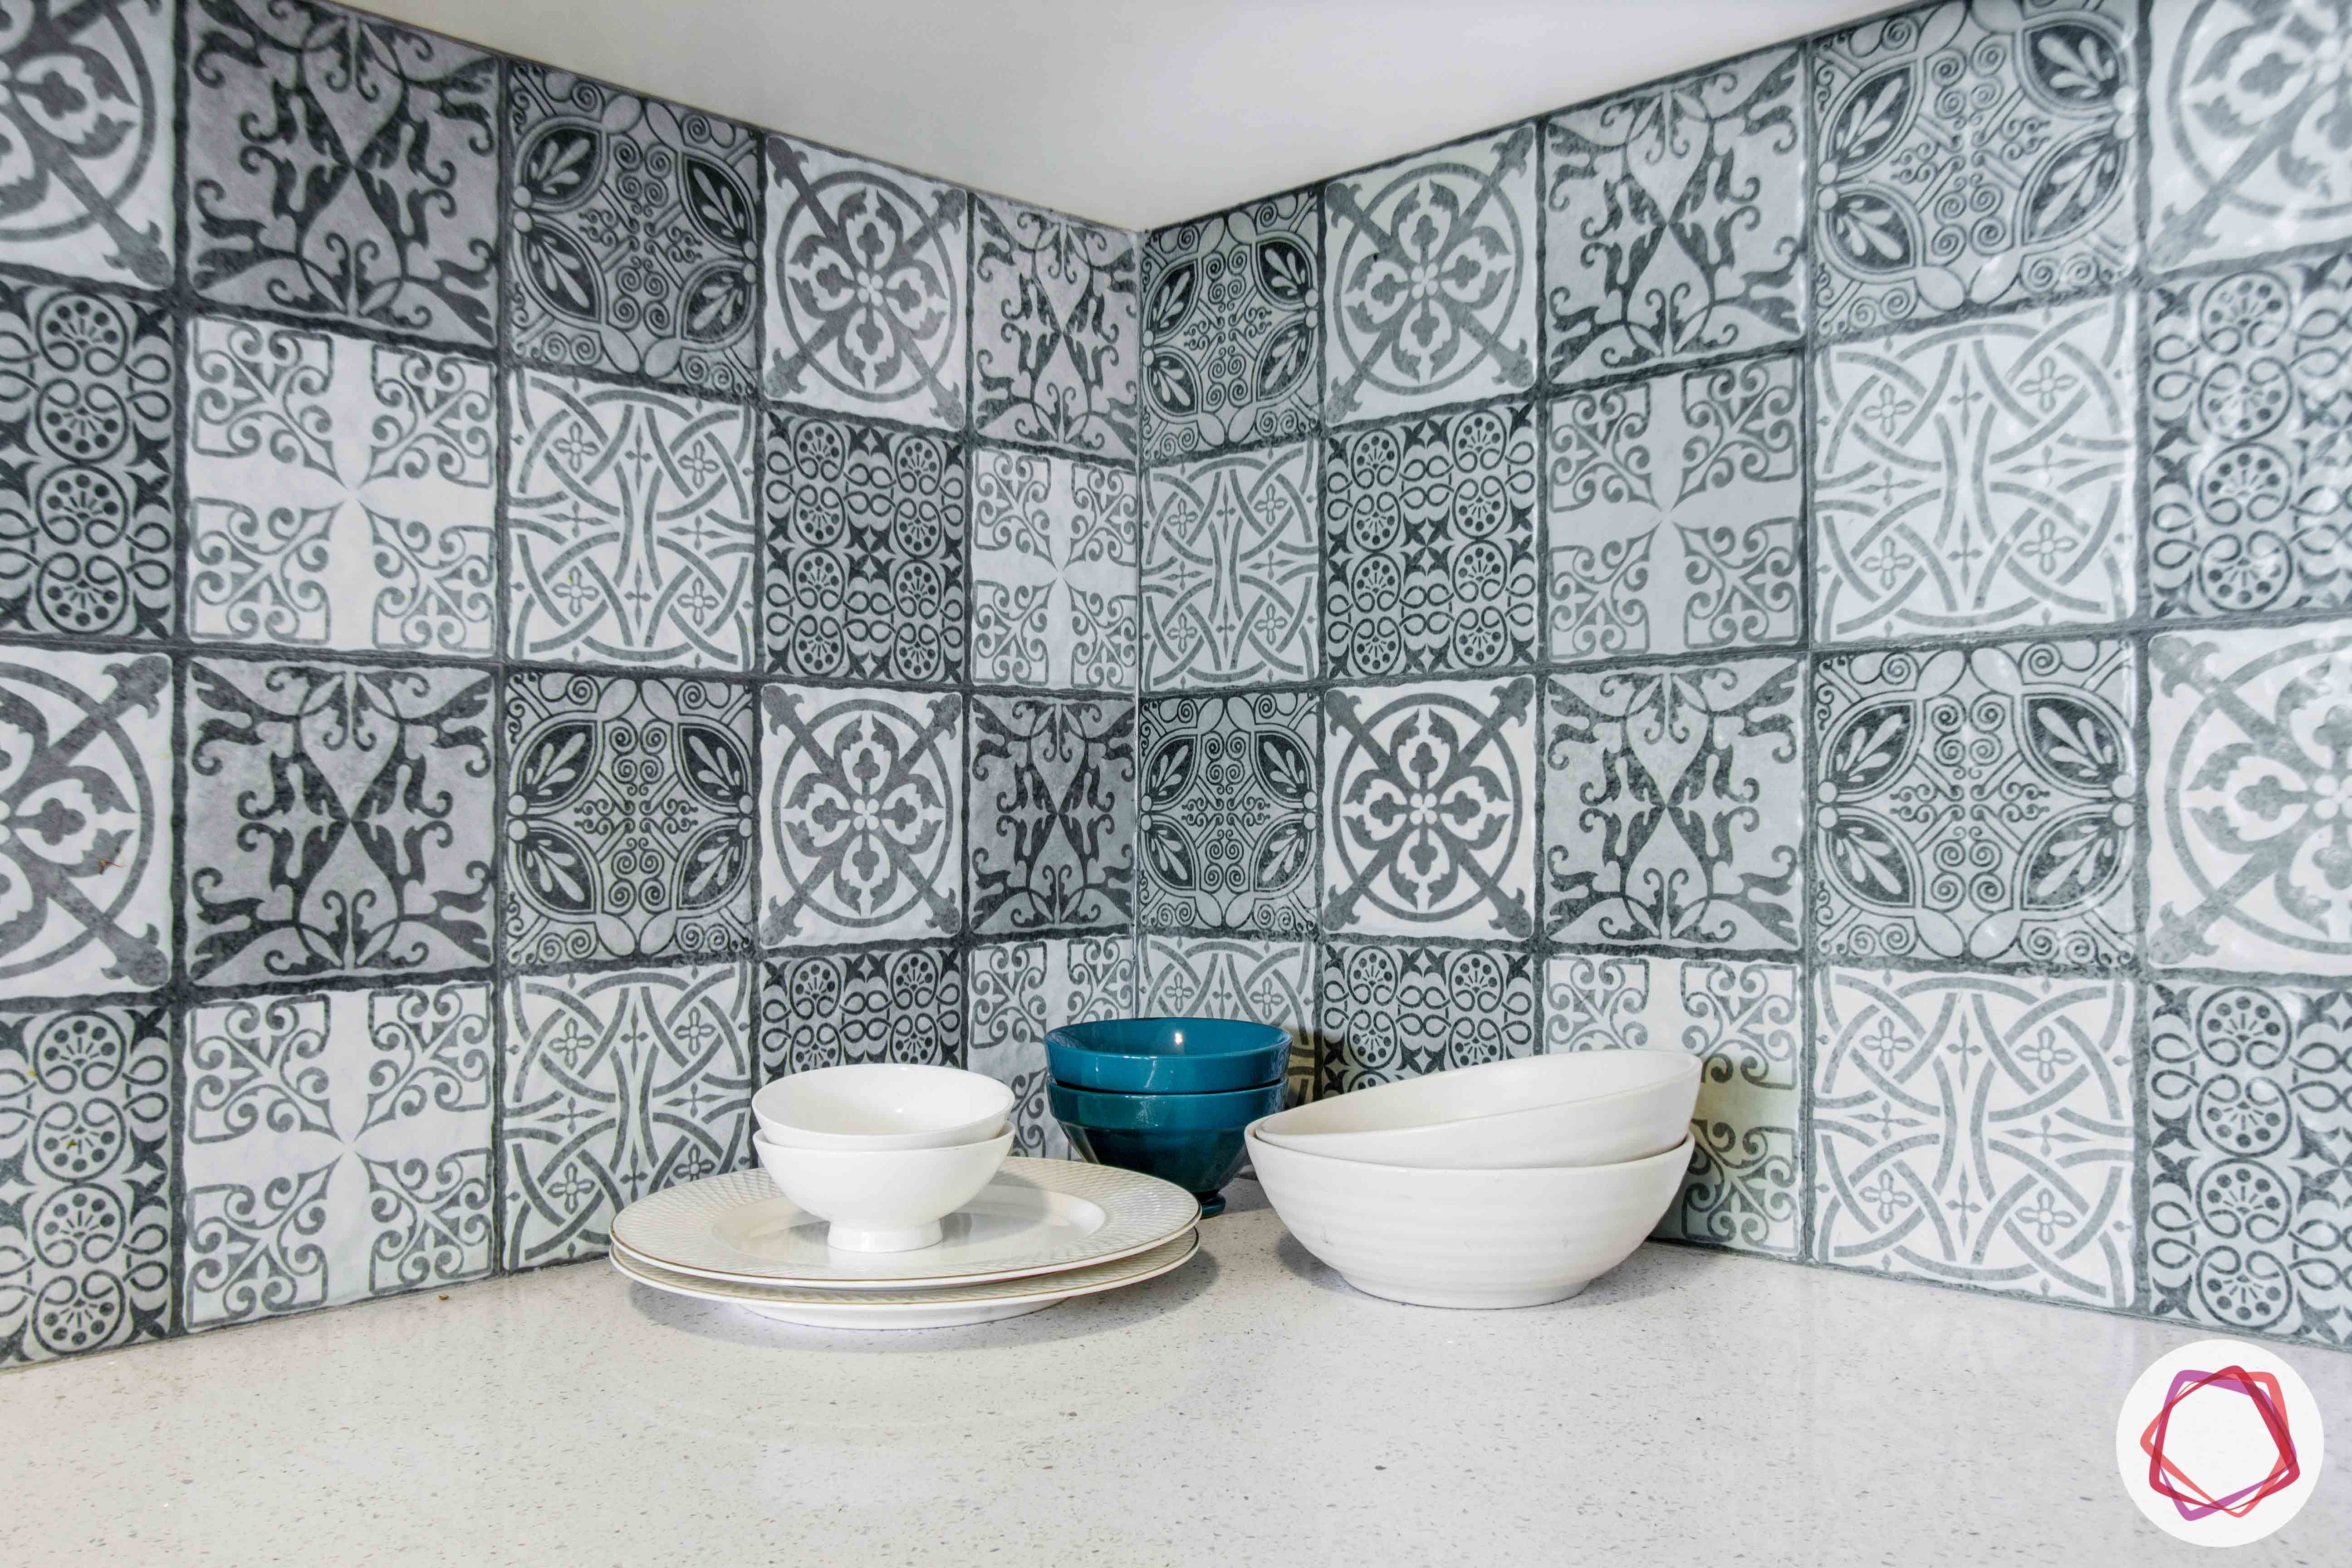 dnr atmosphere-two toned kitchen design-moroccan tiles designs